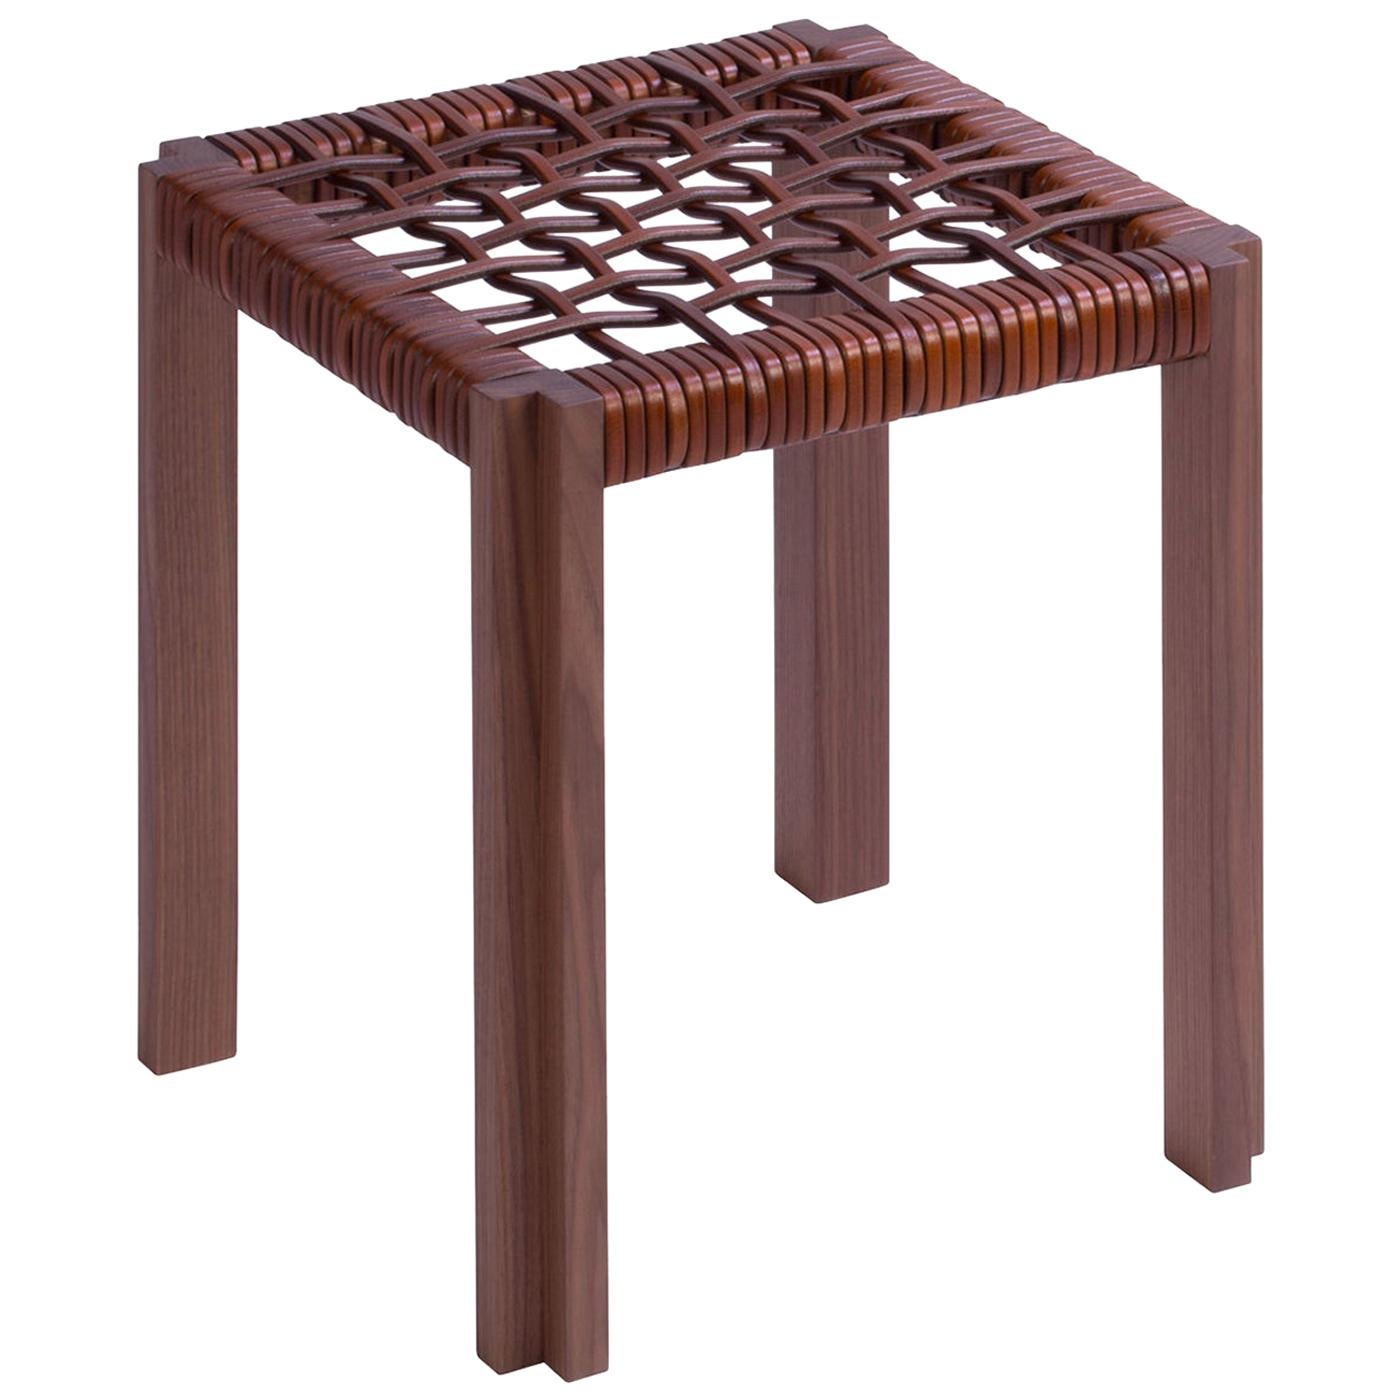 Enlaced Leather Stool For Sale